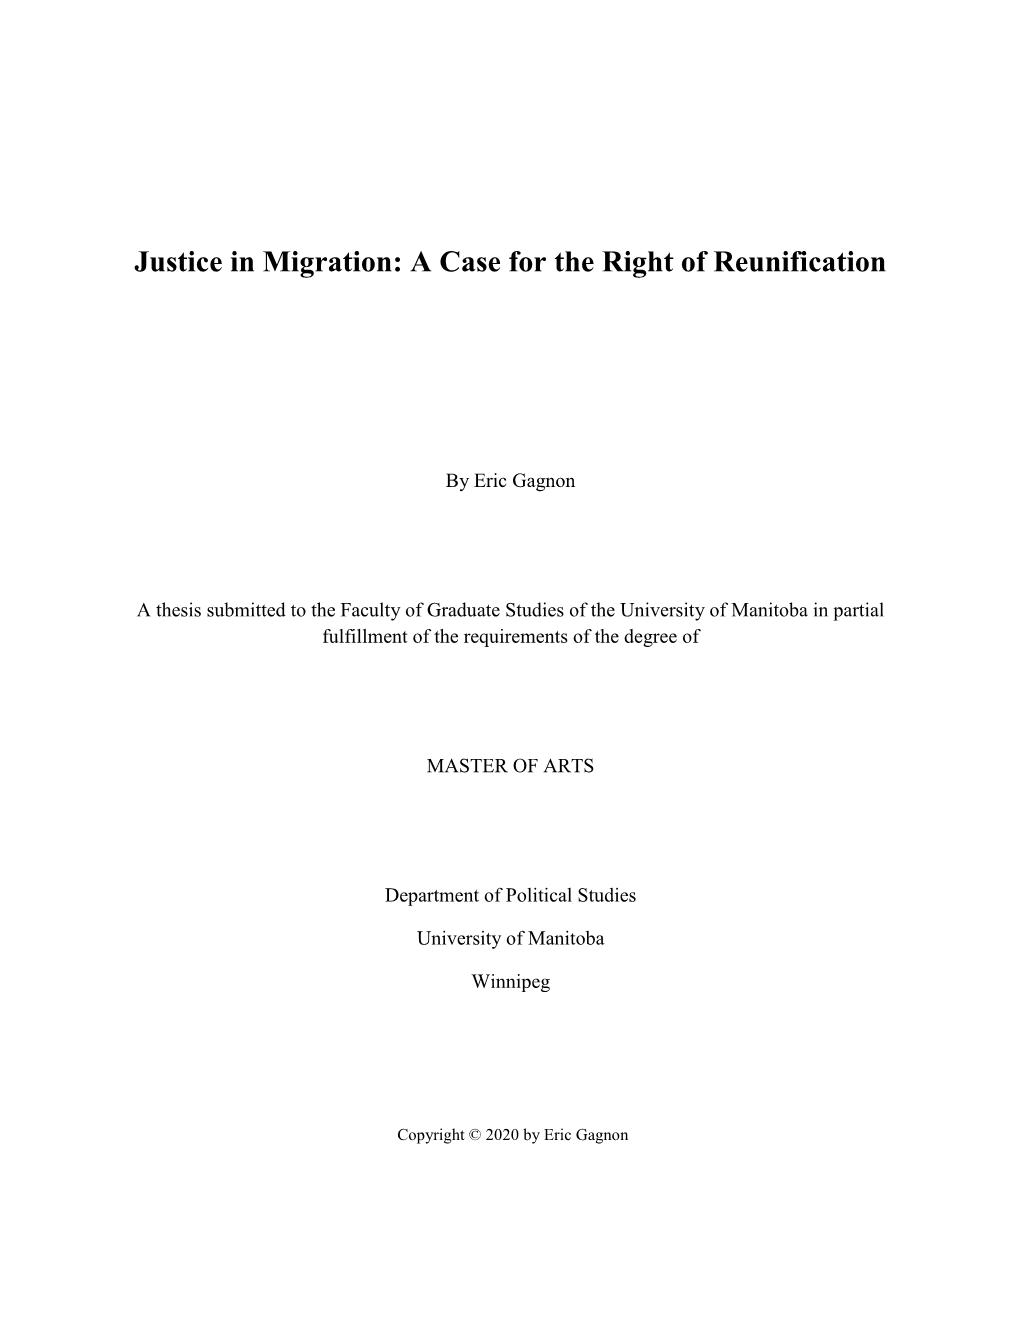 Justice in Migration: a Case for the Right of Reunification